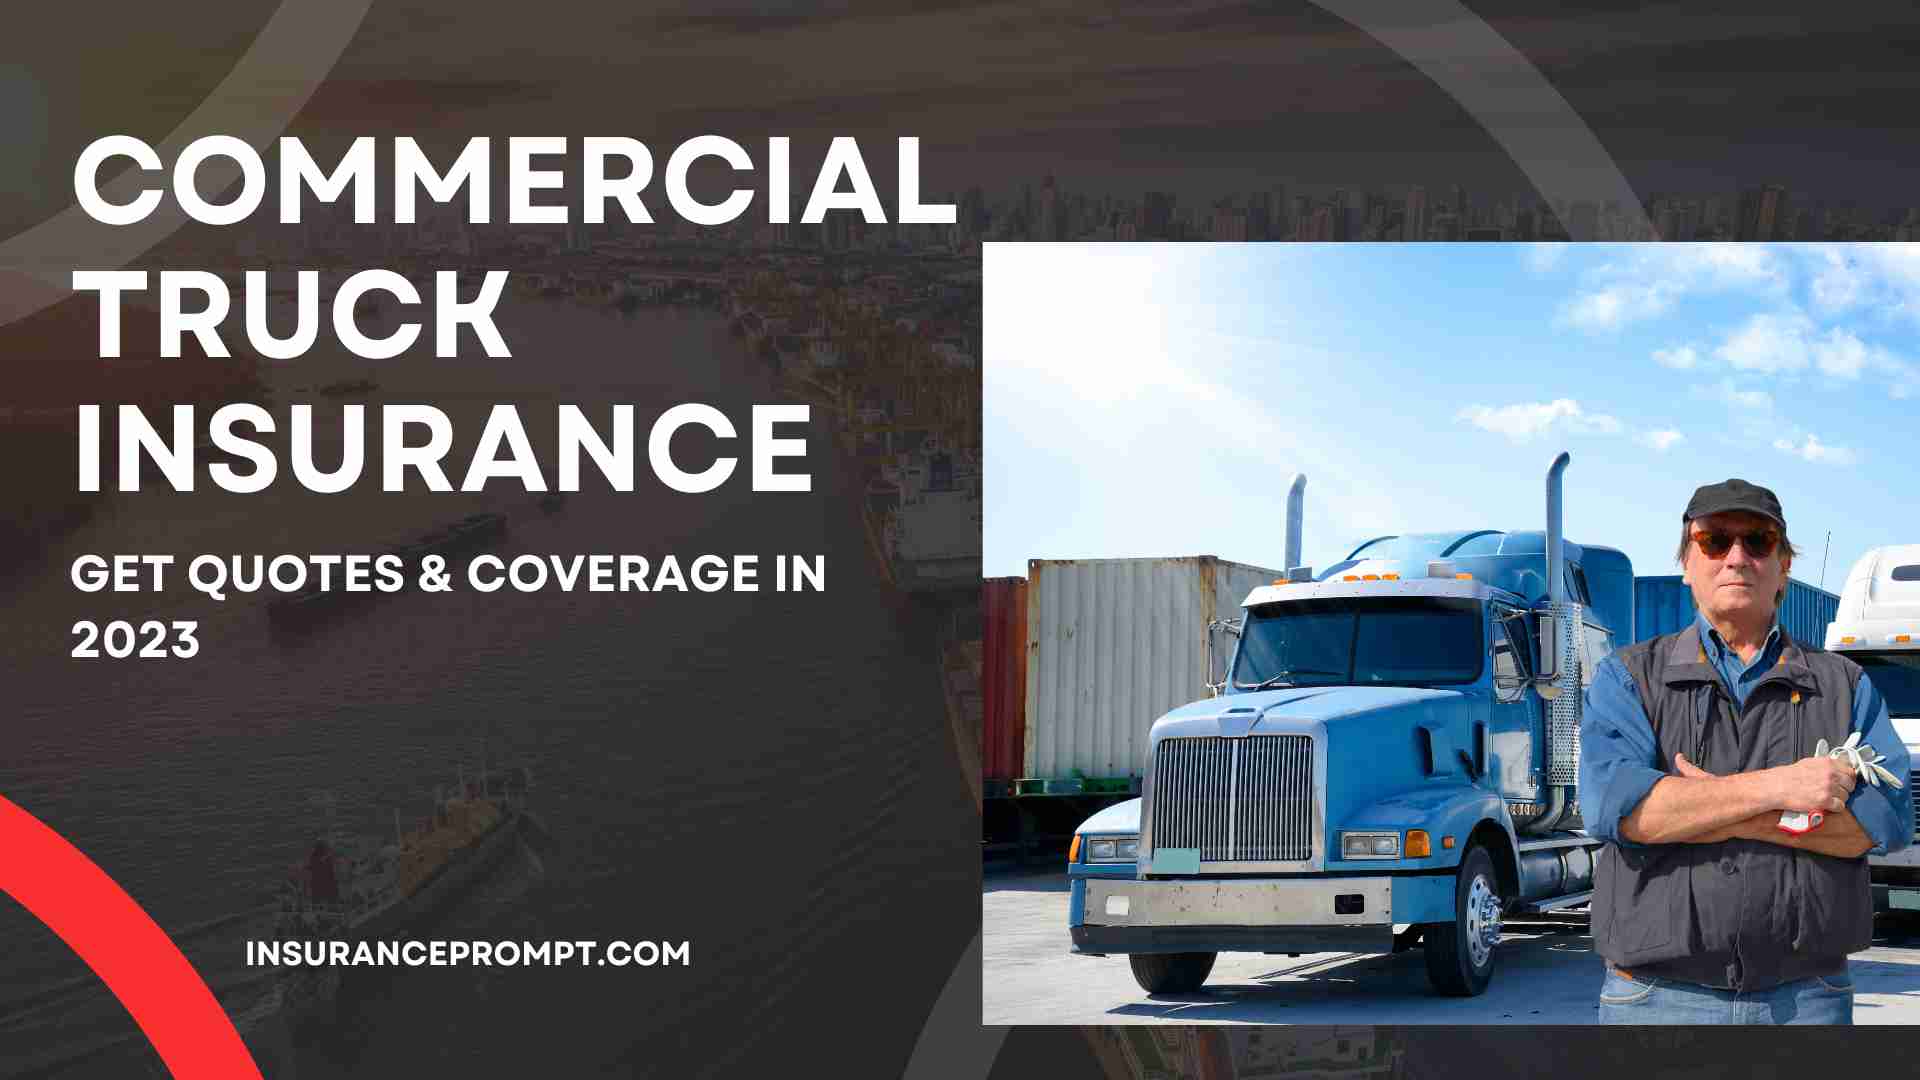 Commercial Truck Insurance Get Quotes & Coverage In 2023